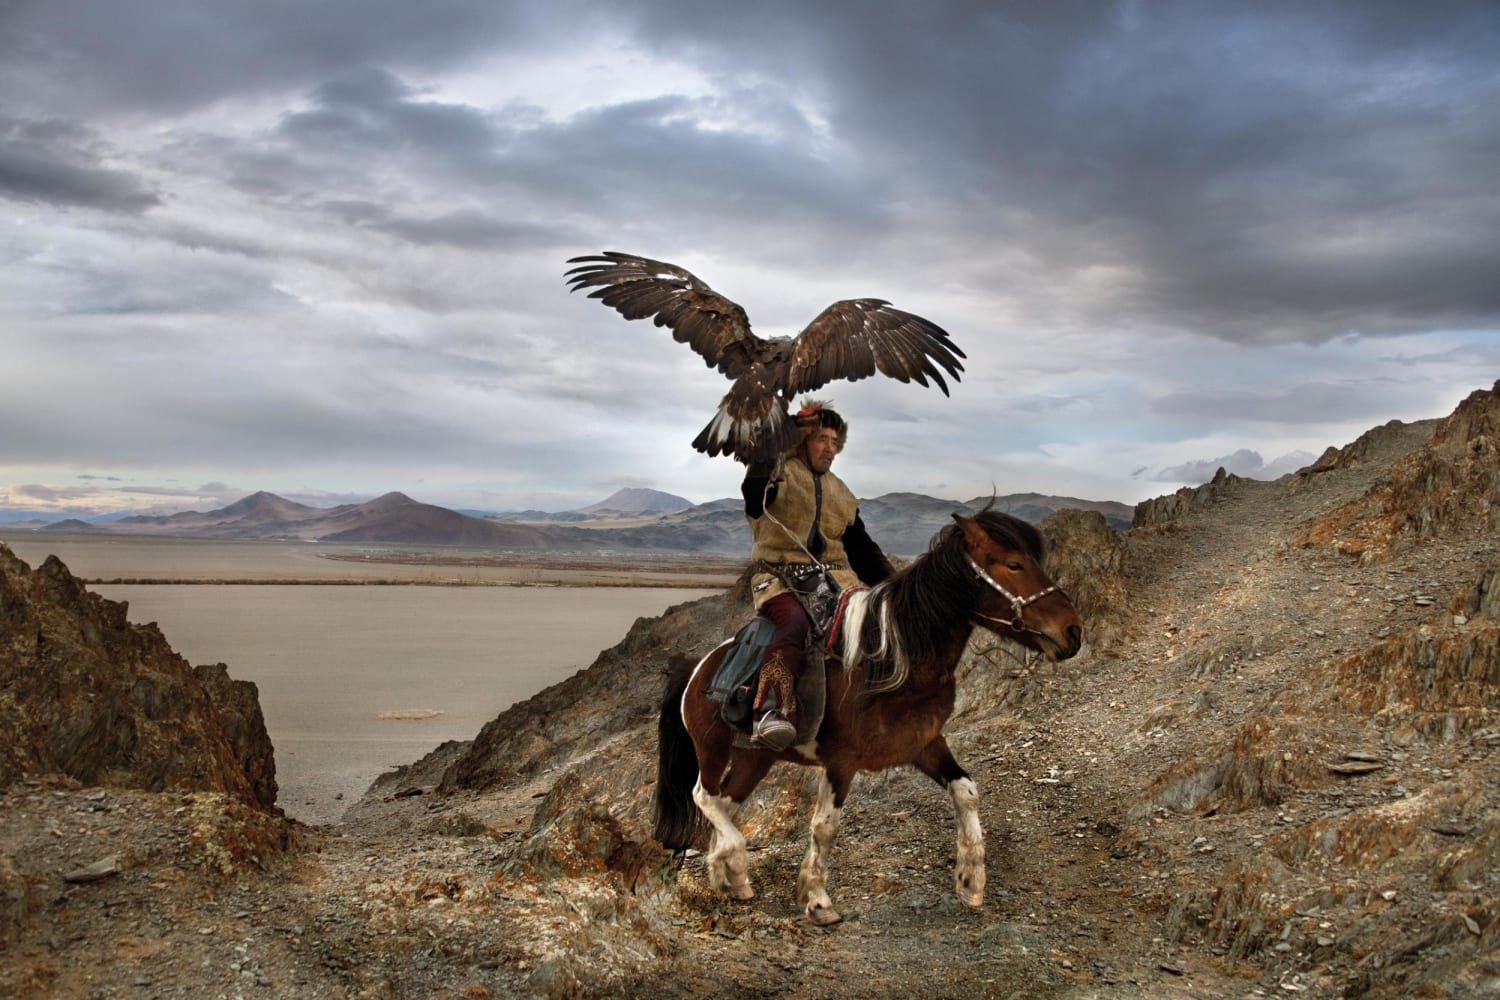 Six stunning Steve McCurry photos that show the complex relationship between humans and animals